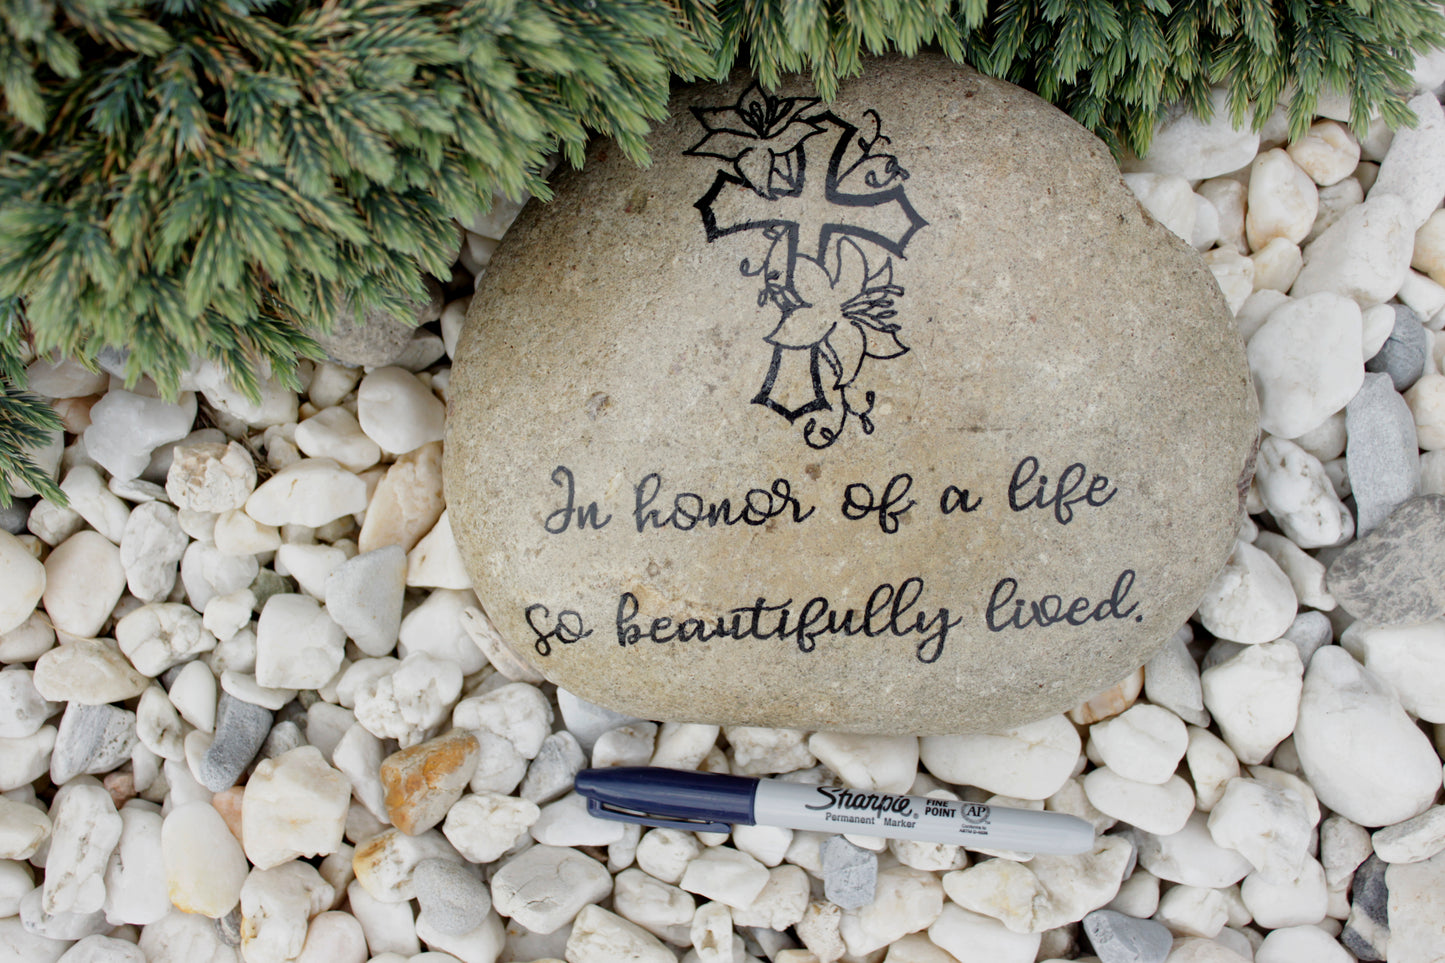 Large Memorial Garden Stone - Life Beautifully Lived